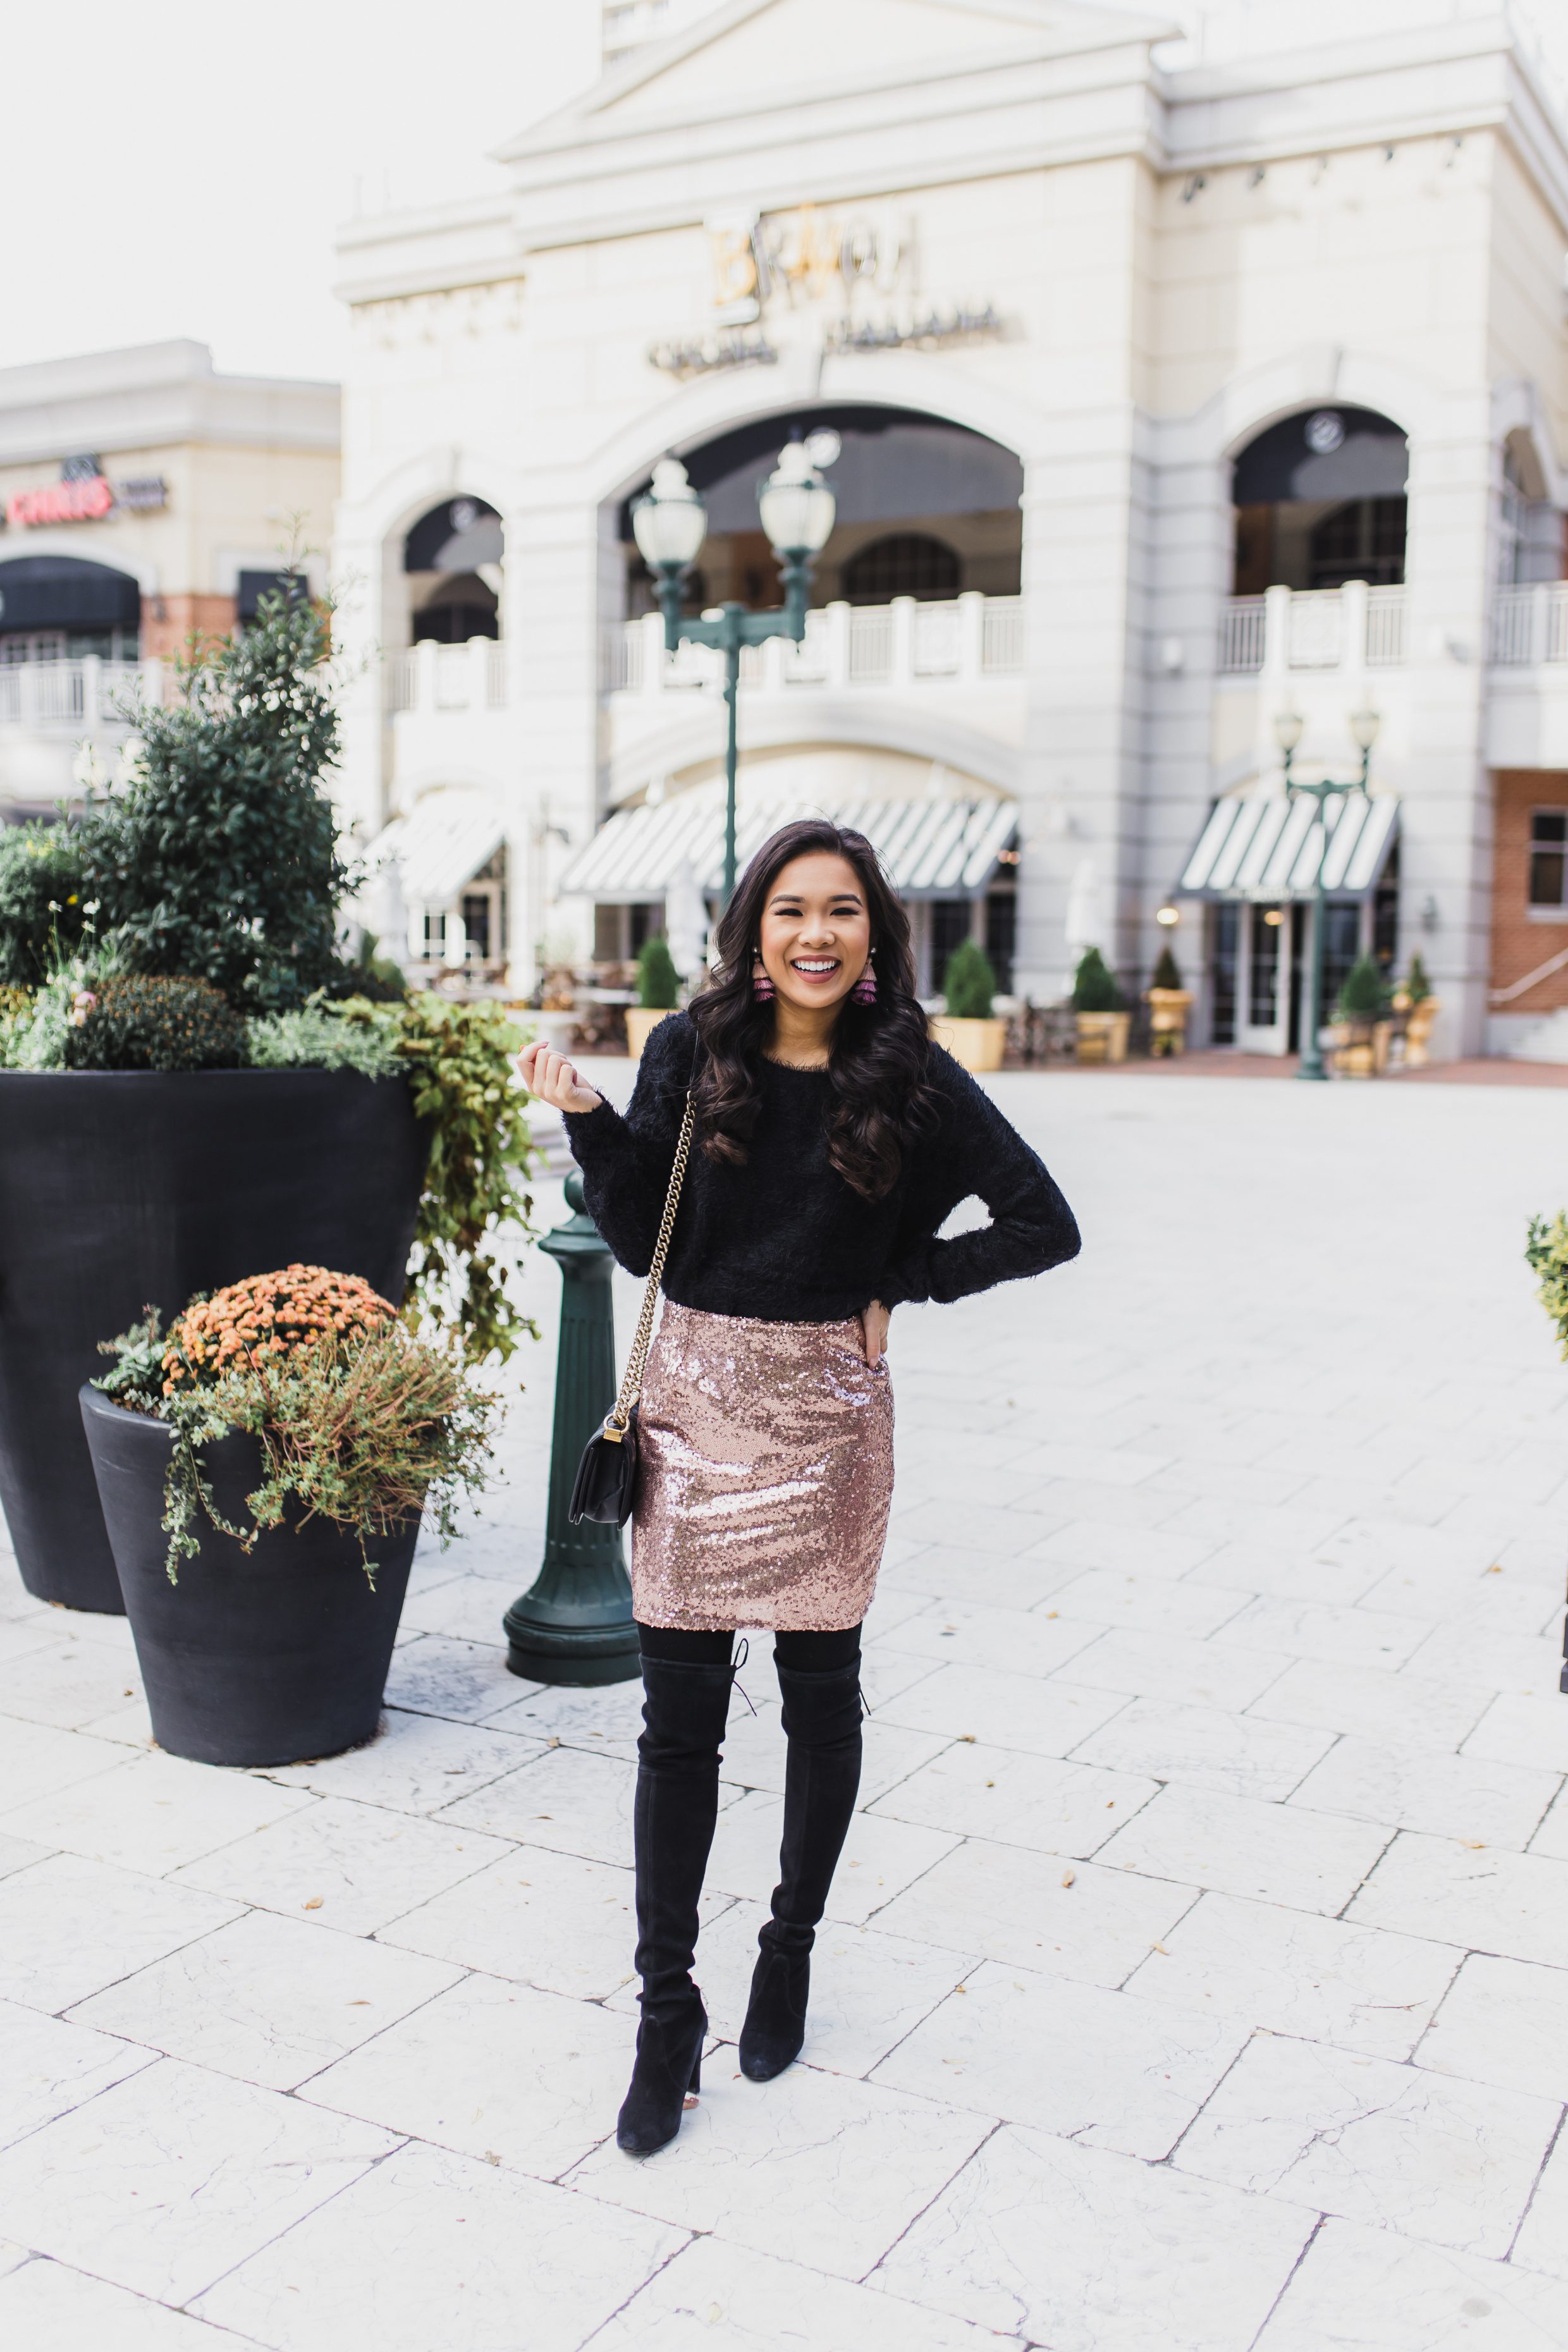 sequin skirt and sweater